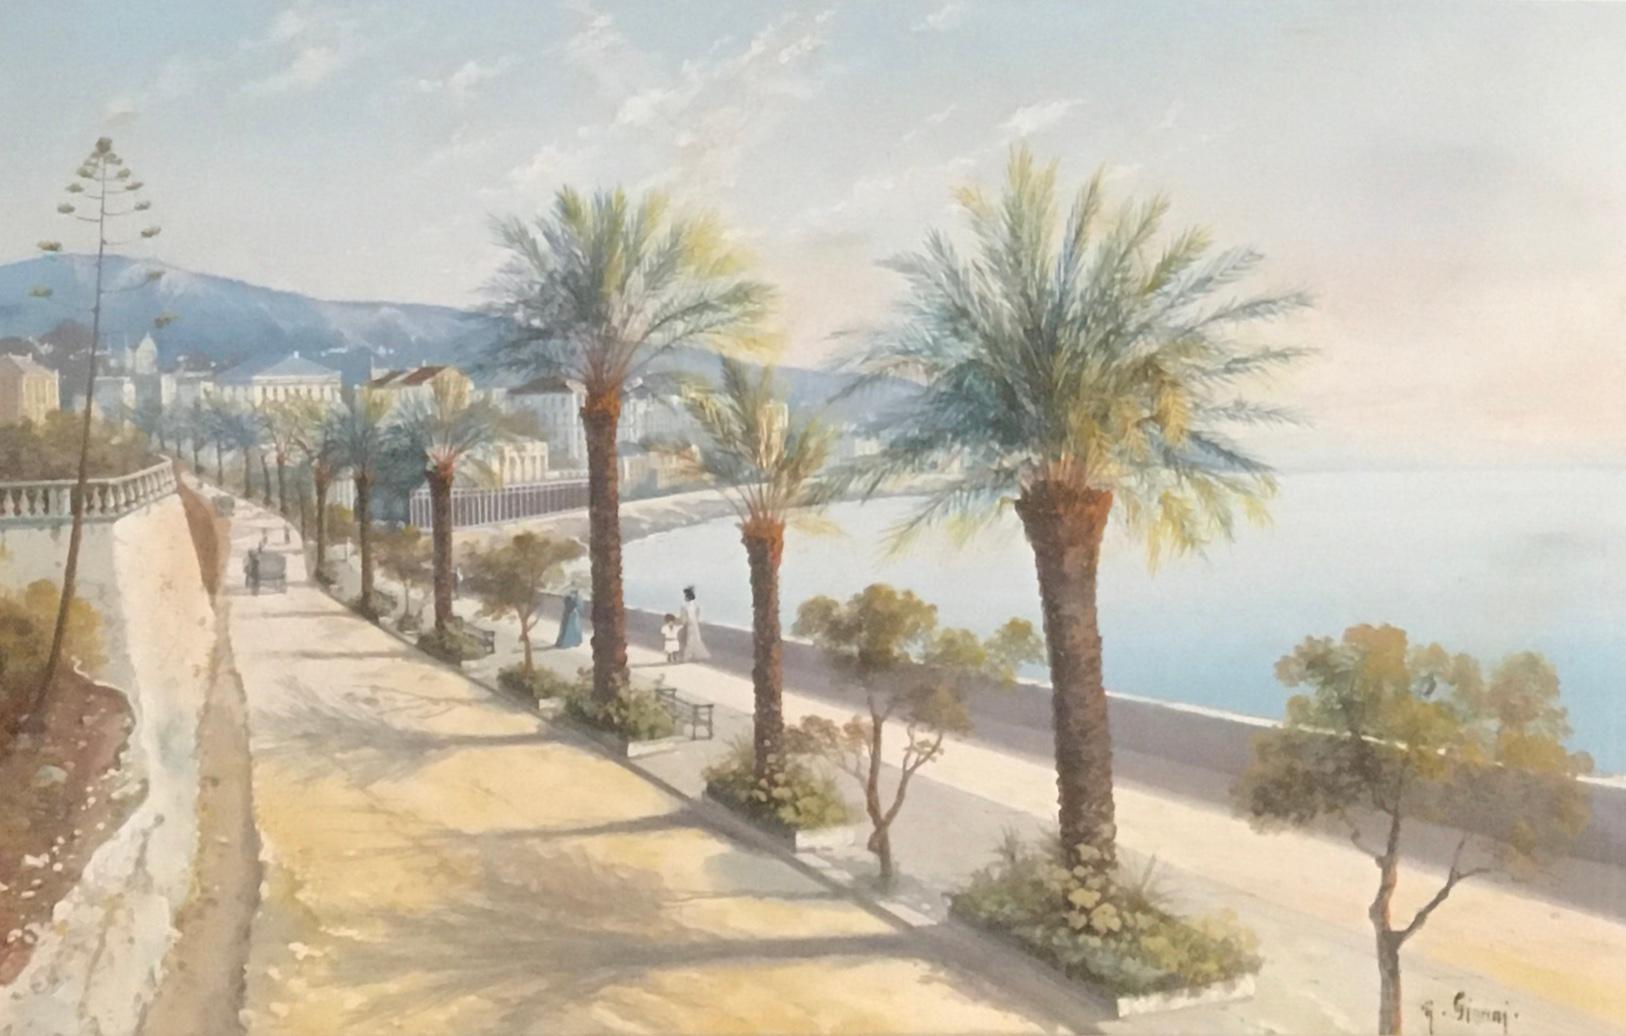  Yves Gianni Landscape Painting - Corso dell'Imperatrice, Sanremo